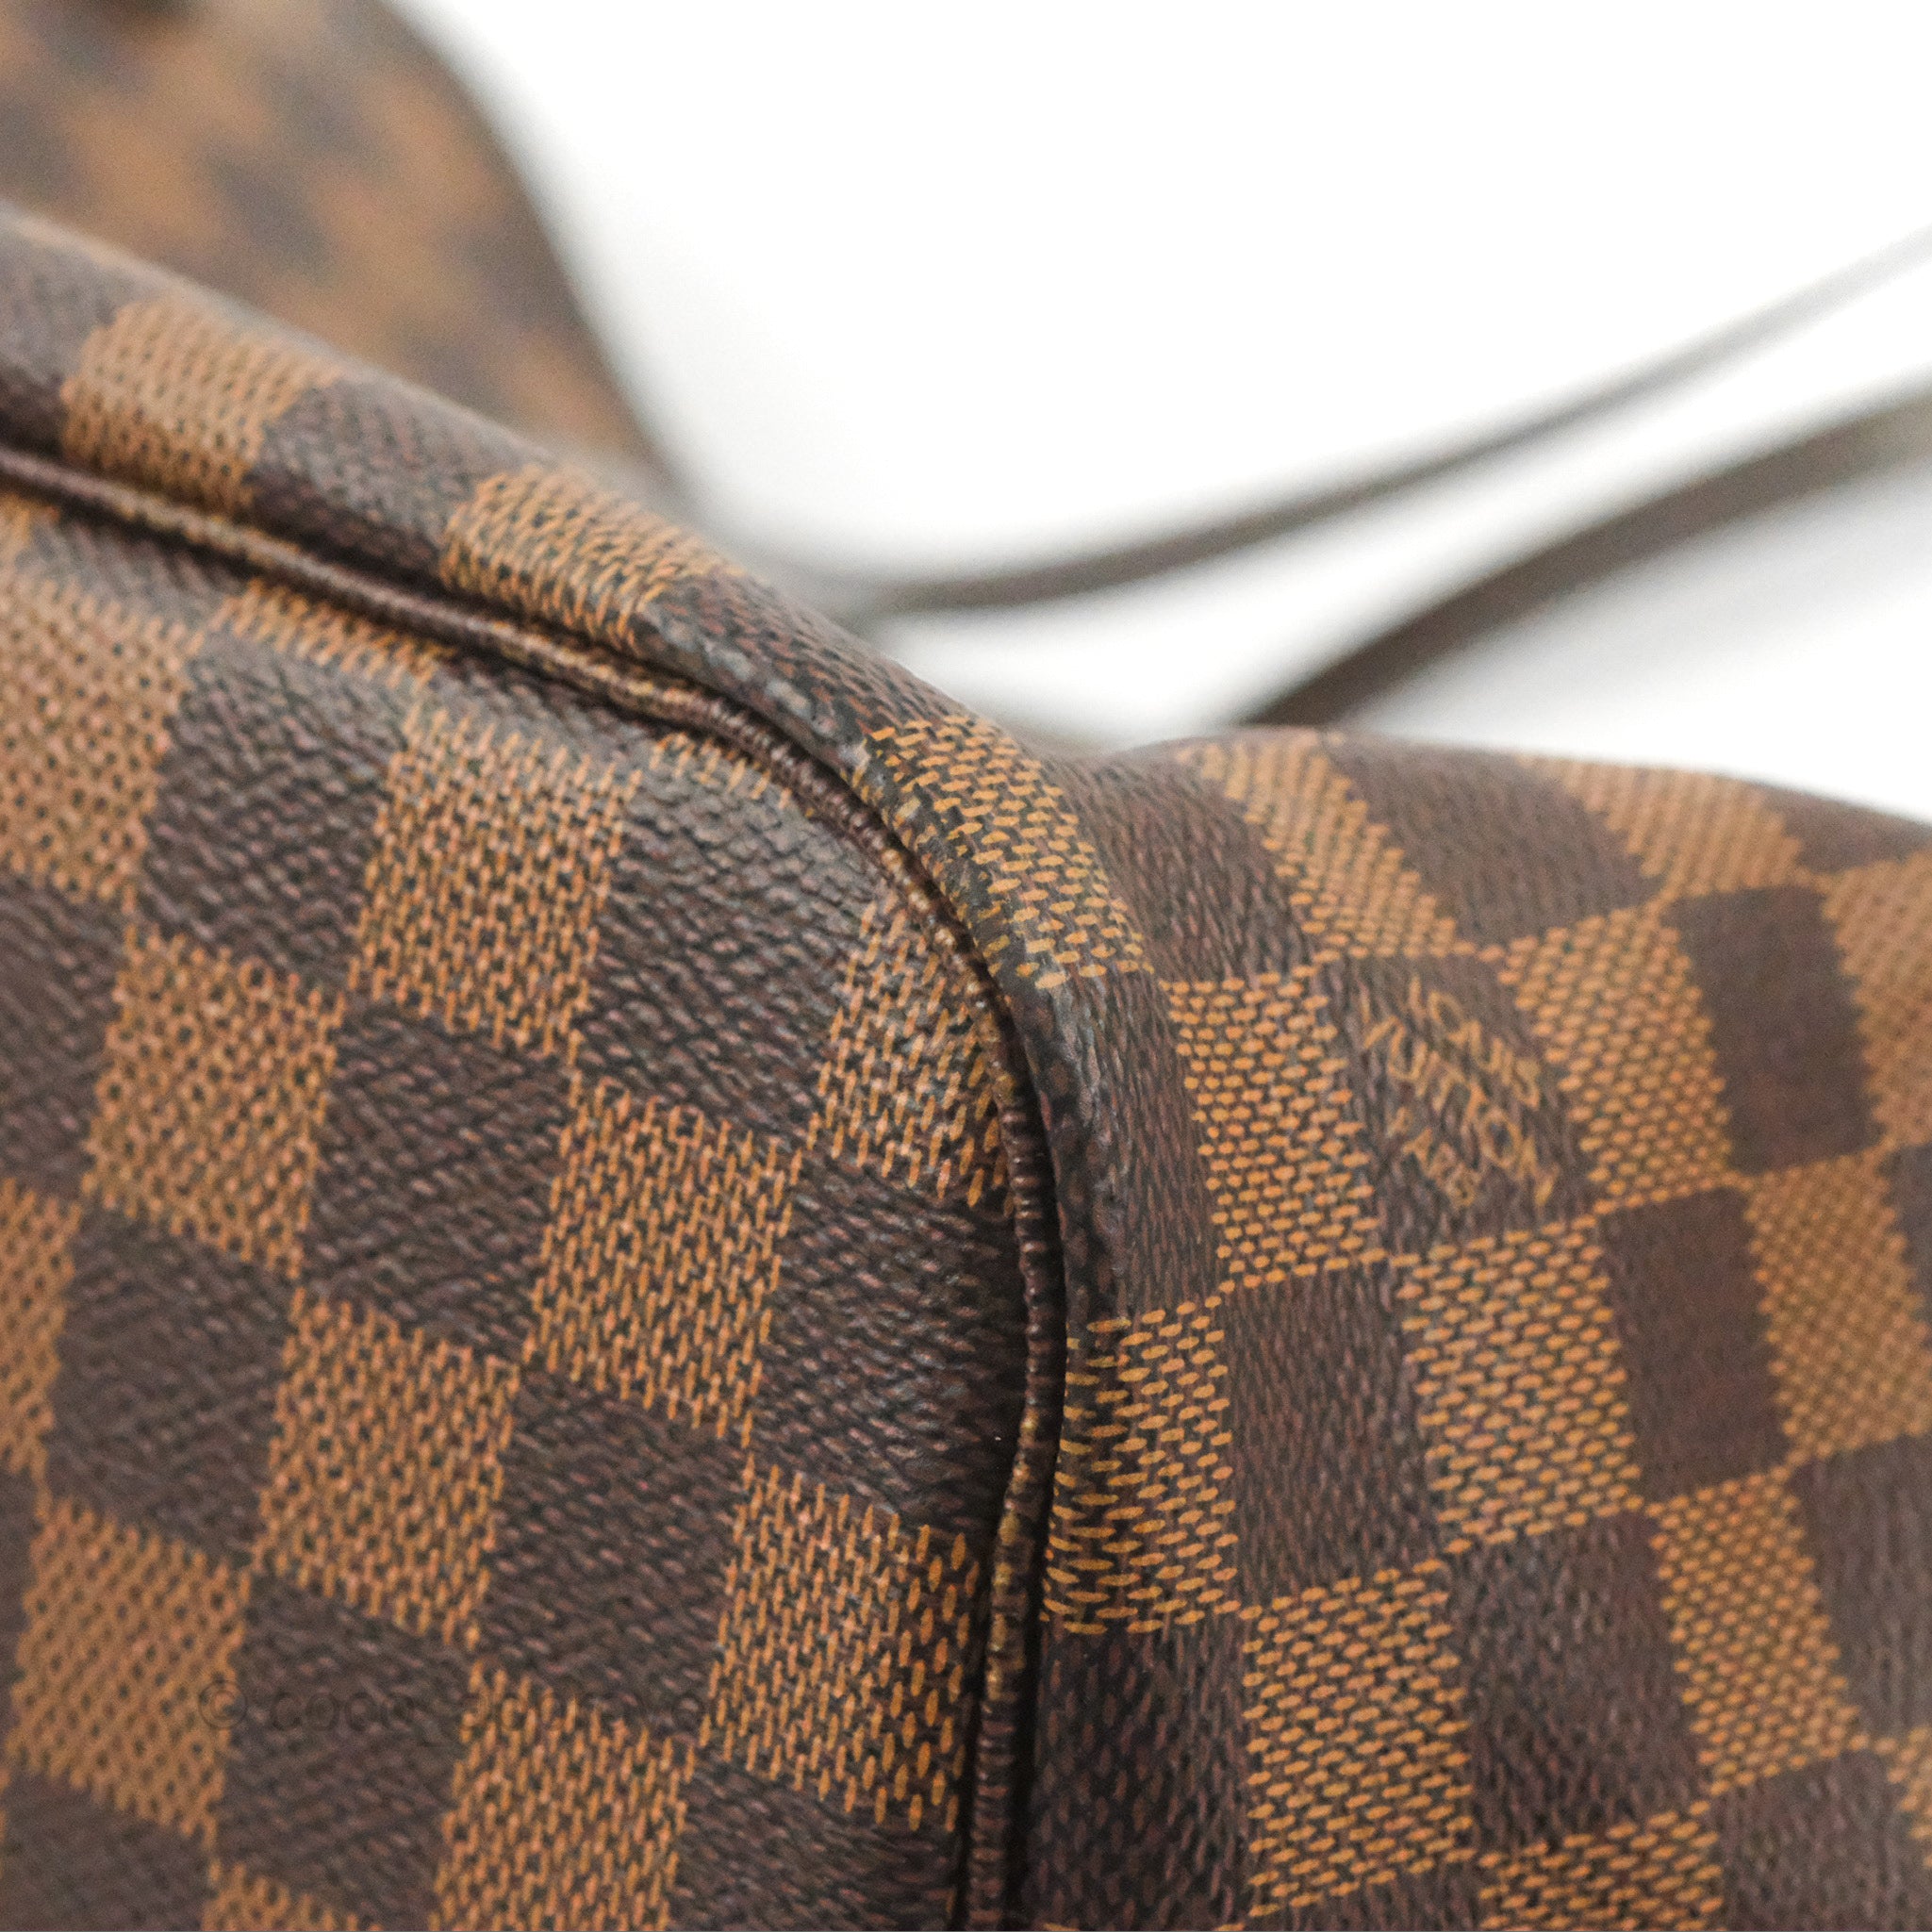 Louis Vuitton Neverfull MM Tote Bag Damier Ebene Canvas – Coco Approved  Studio